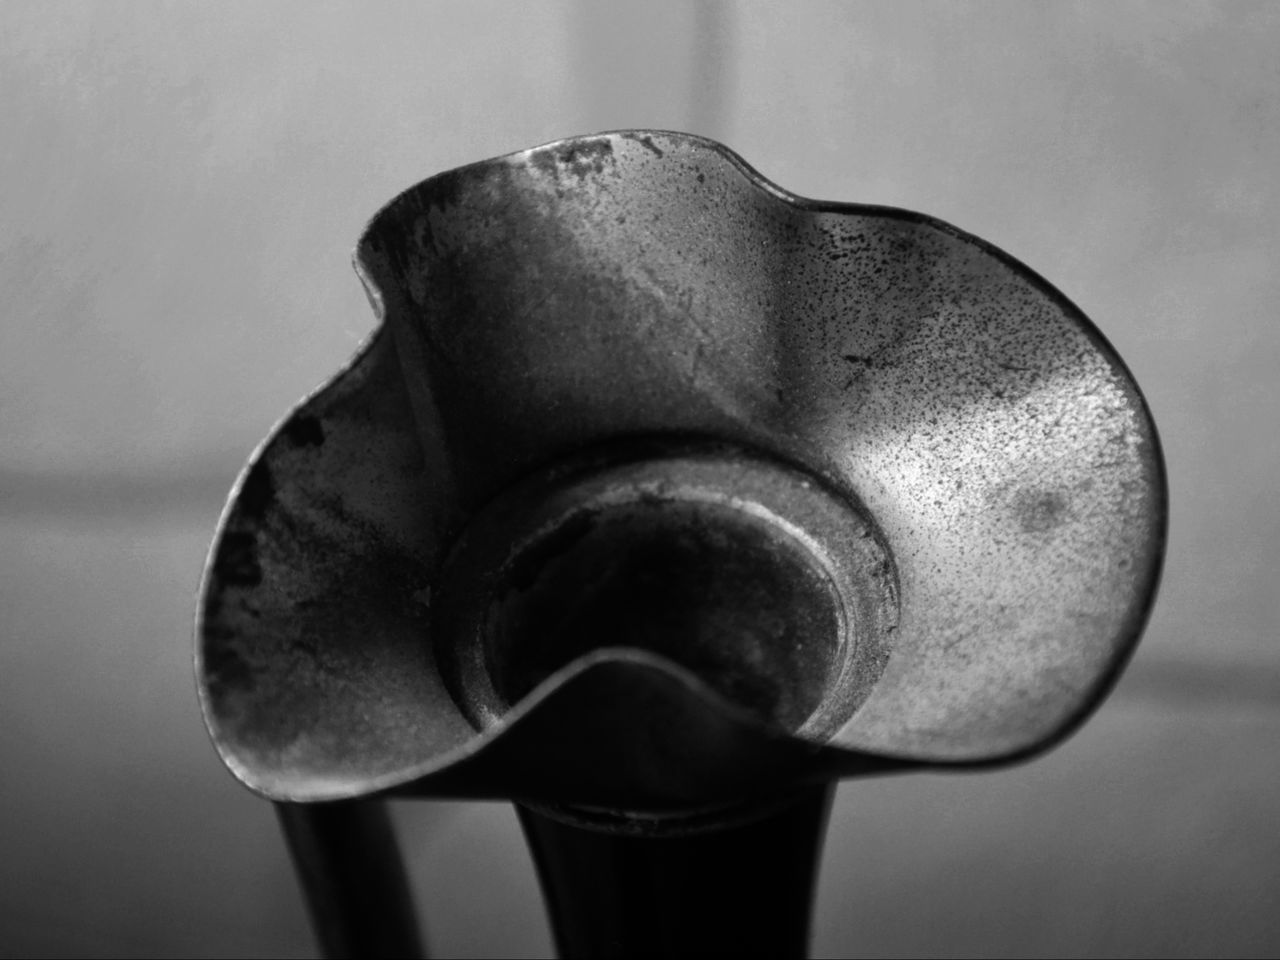 black, black and white, monochrome, monochrome photography, close-up, white, iron, still life photography, no people, macro photography, darkness, light, indoors, metal, sculpture, single object